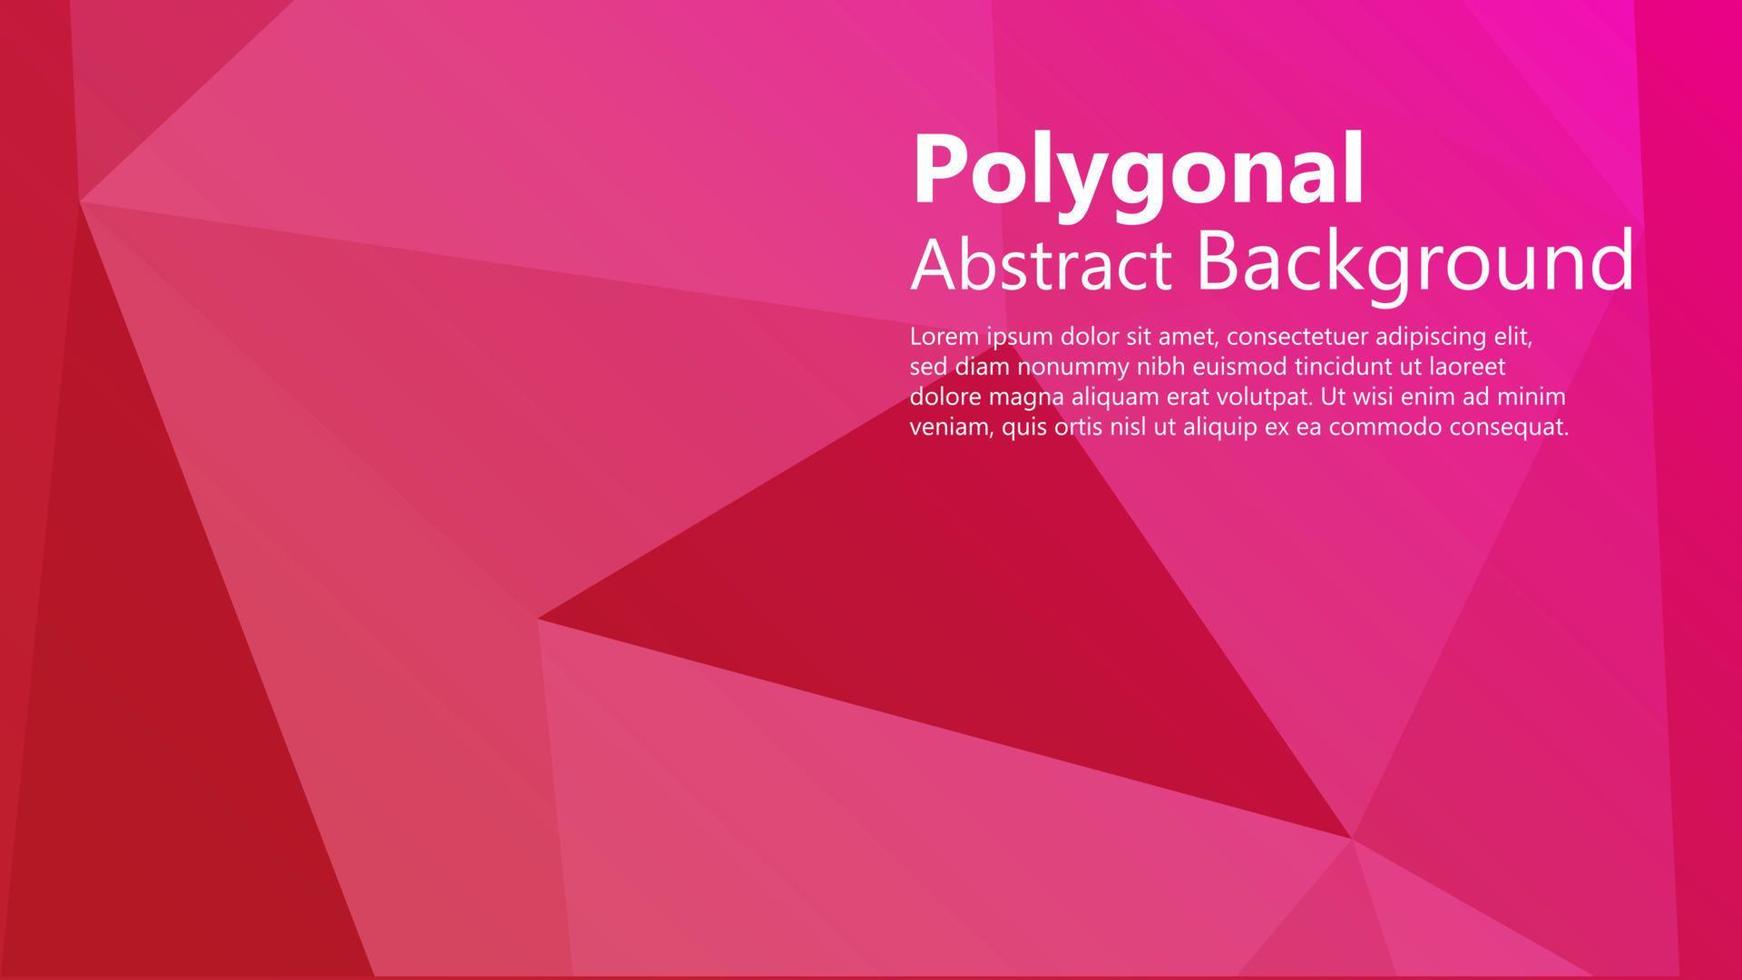 Polygon Abstract Backgrounds. Colorful vector banner.